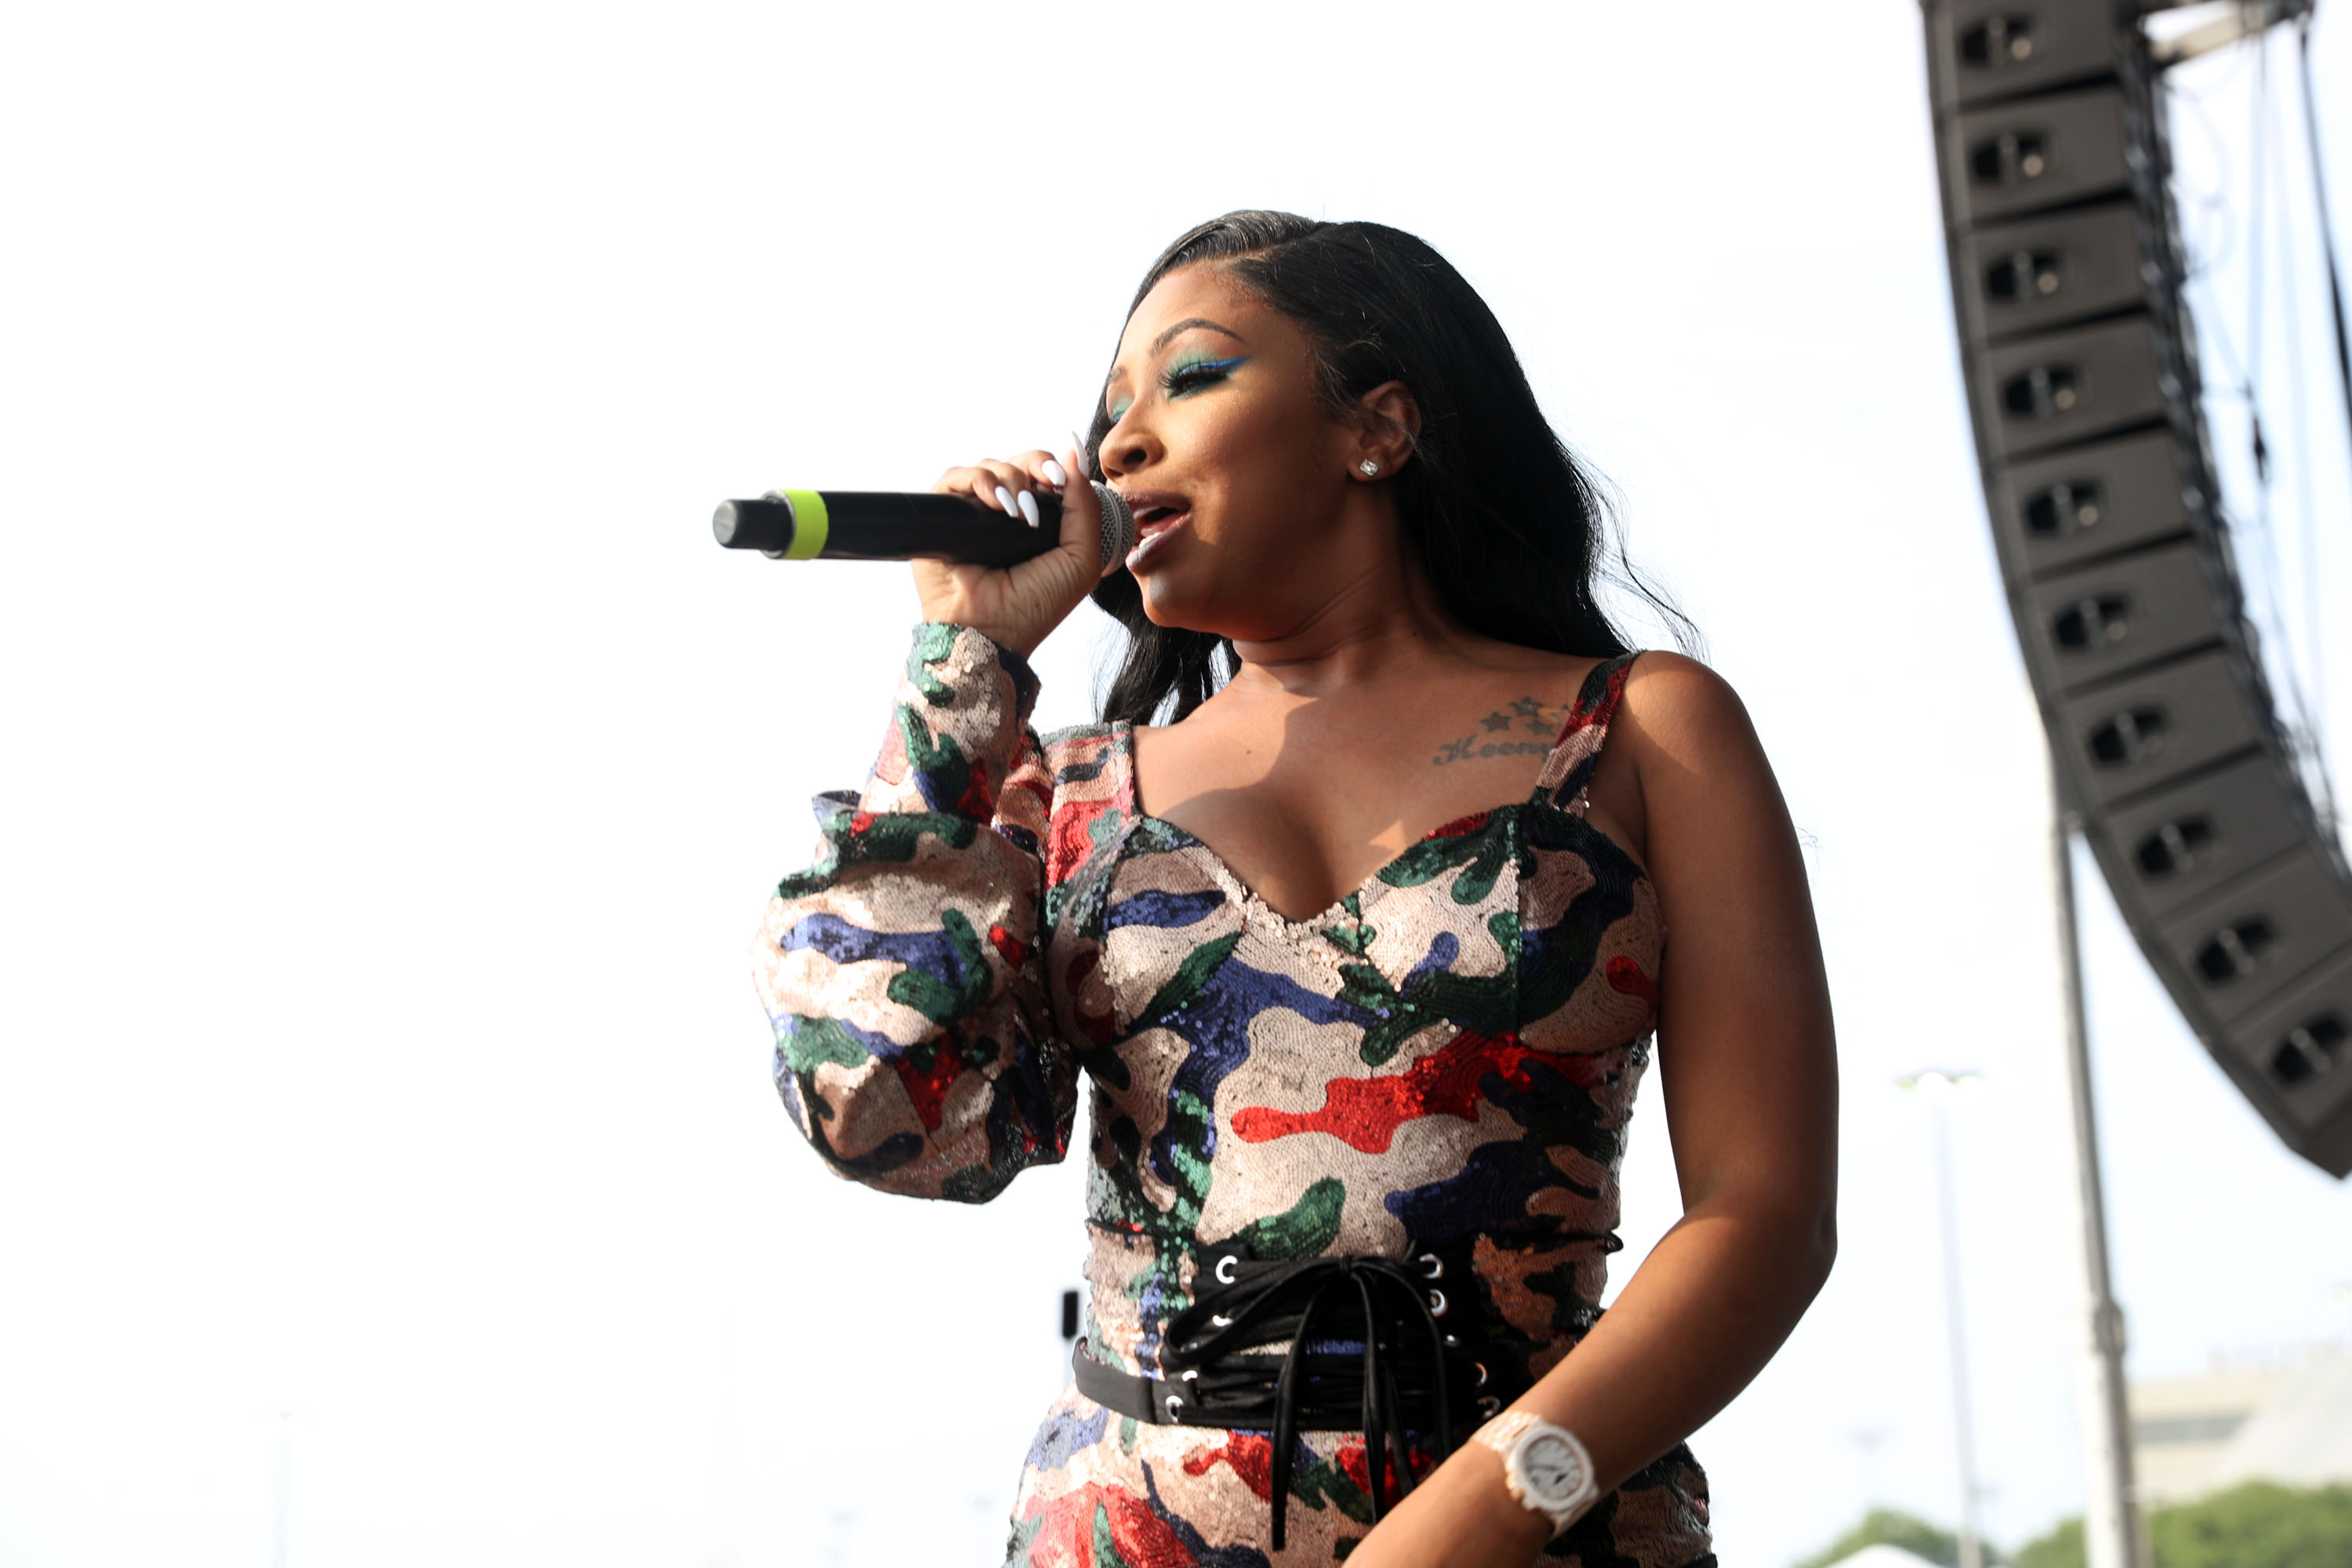 City Girls Yung Miami Shares Video Of Herself Crowdsurfing While Pregnant 9201